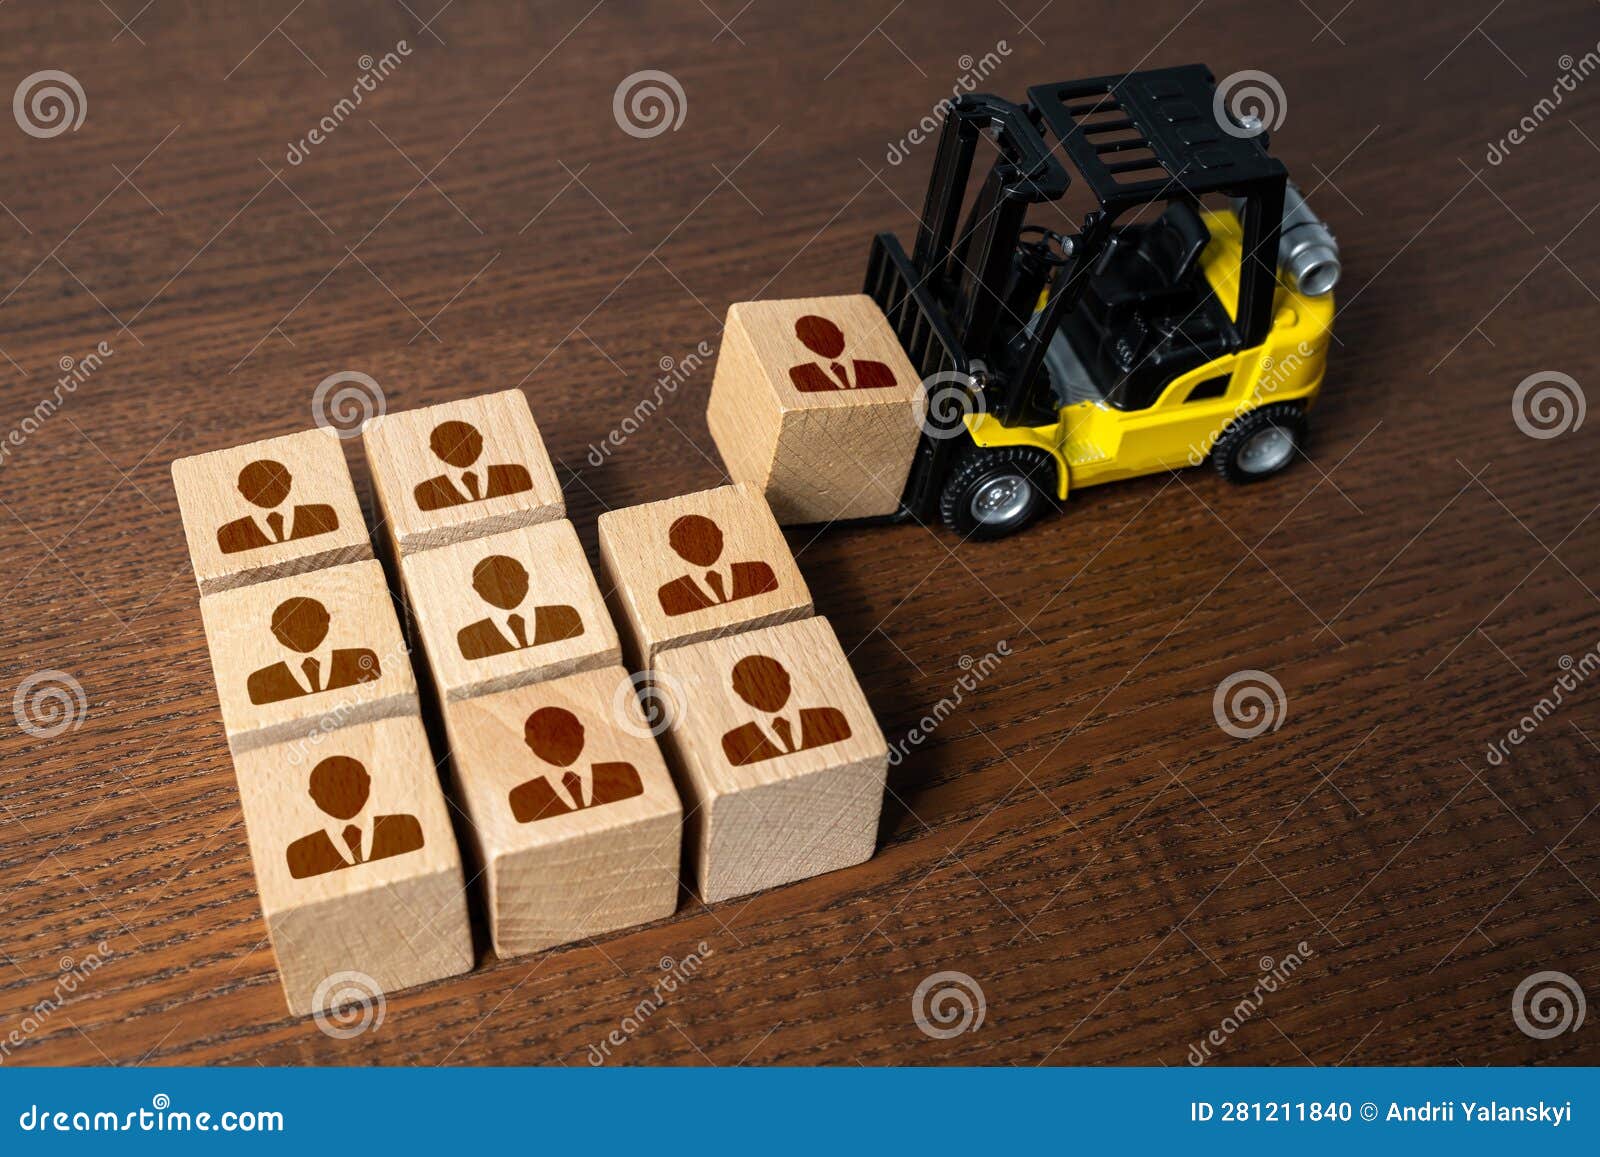 forklift builds a team of people. recruitment seeking to fill job openings putting people in their places. opening of new jobs.